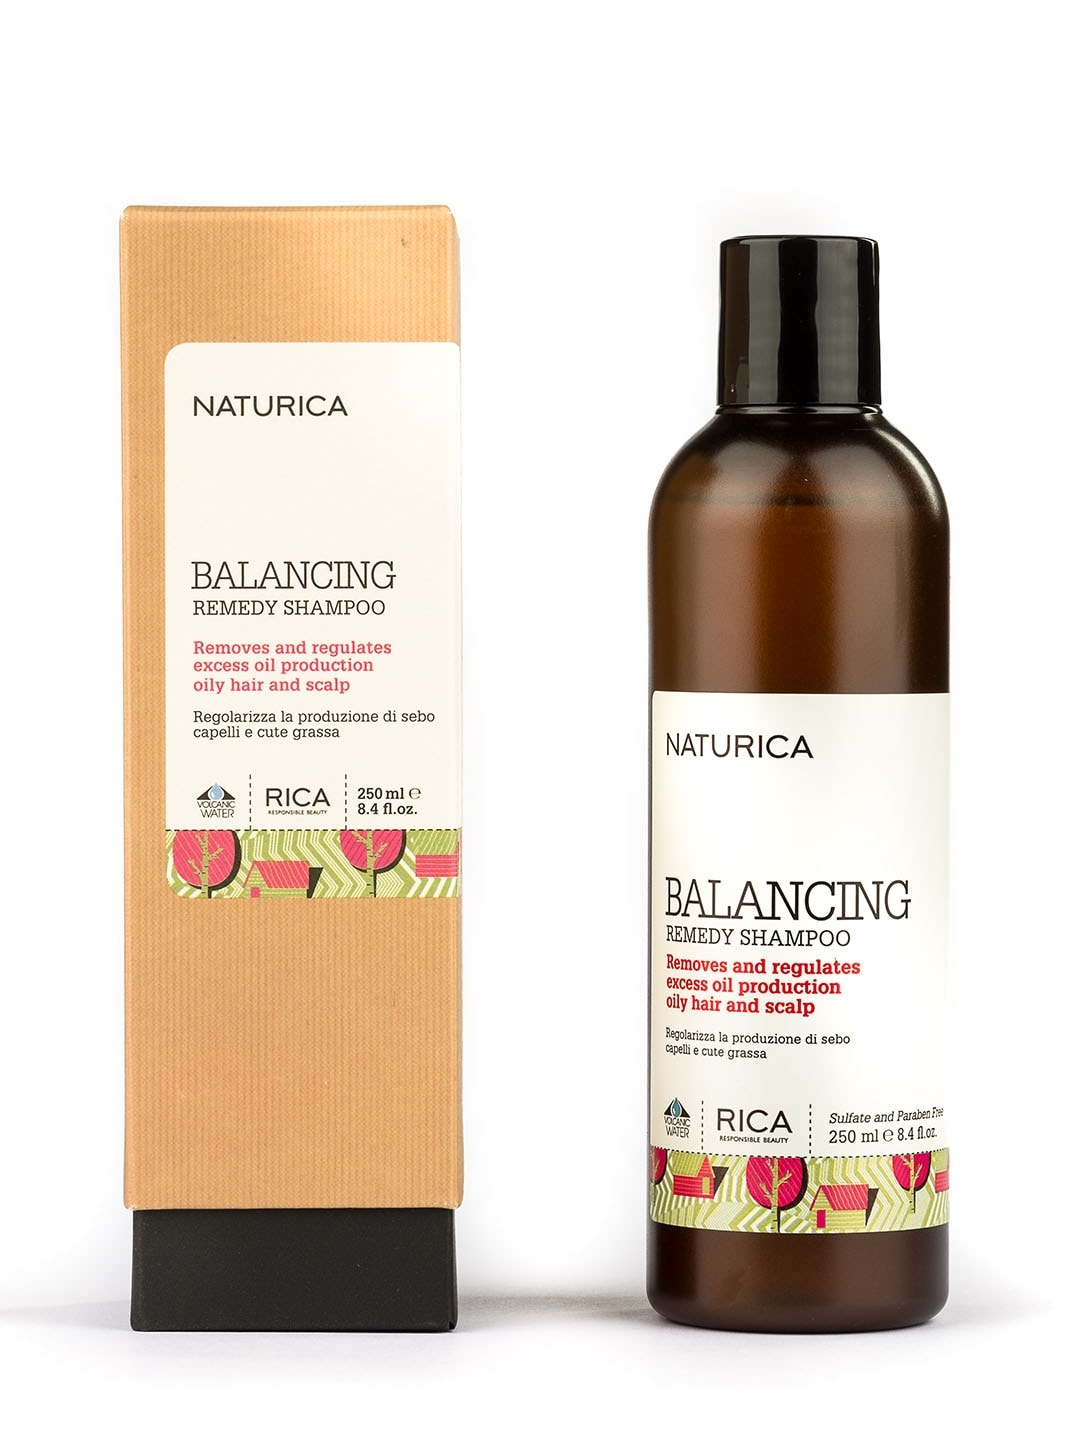 Naturica Balancing Remedy Shampoo by Rica-250ml Price in India